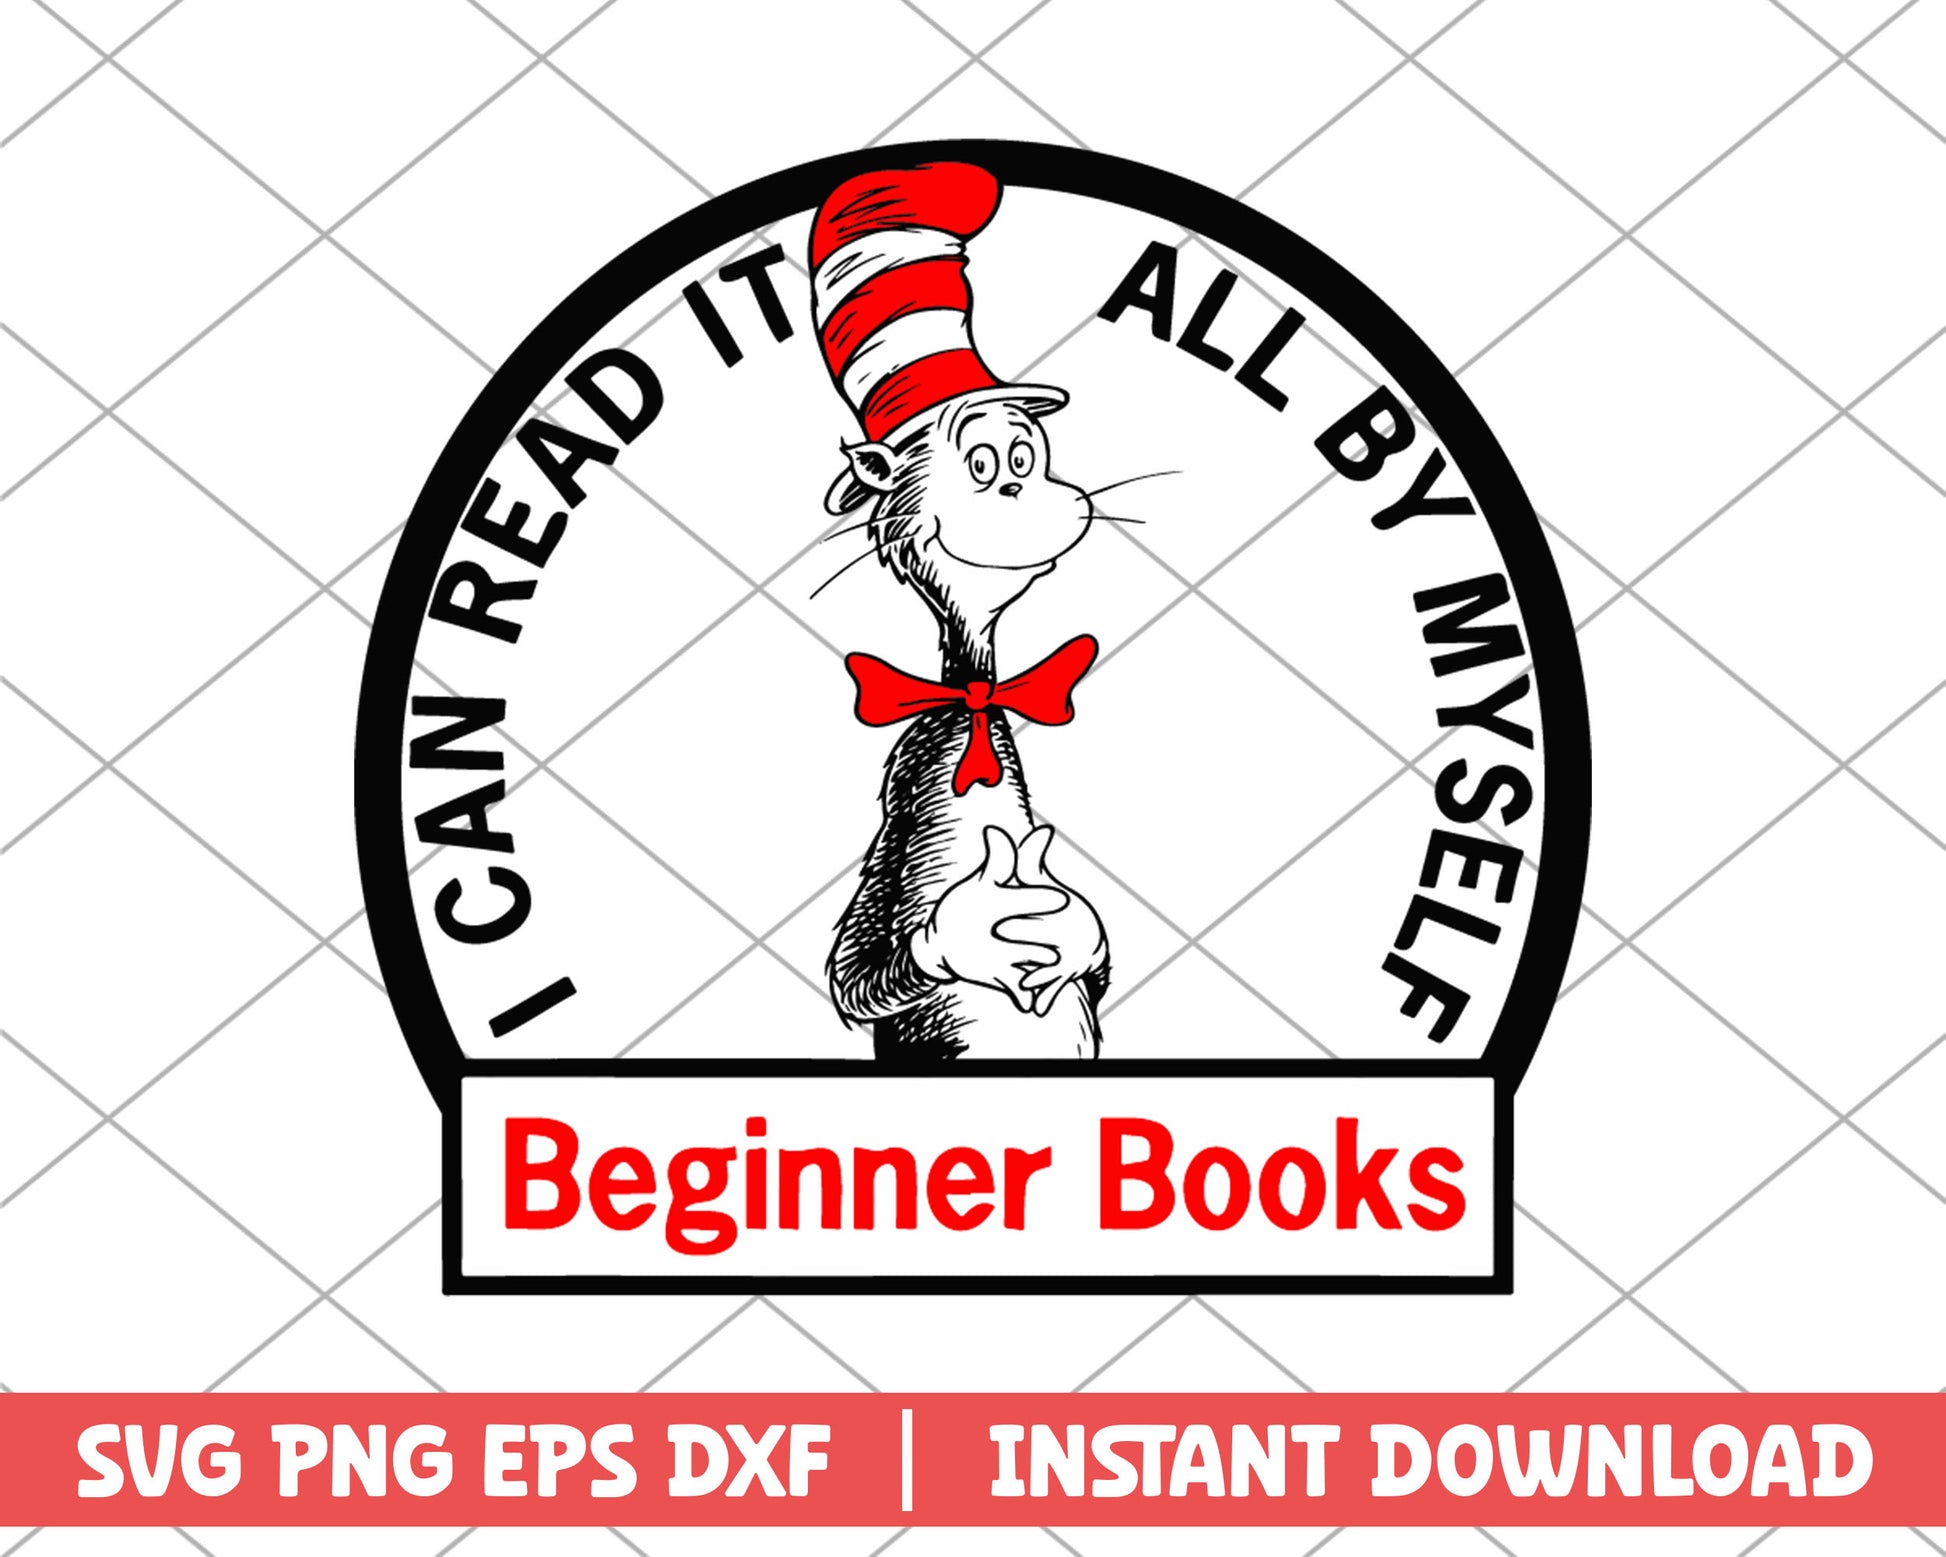 I can read it all by myself beginner books svg